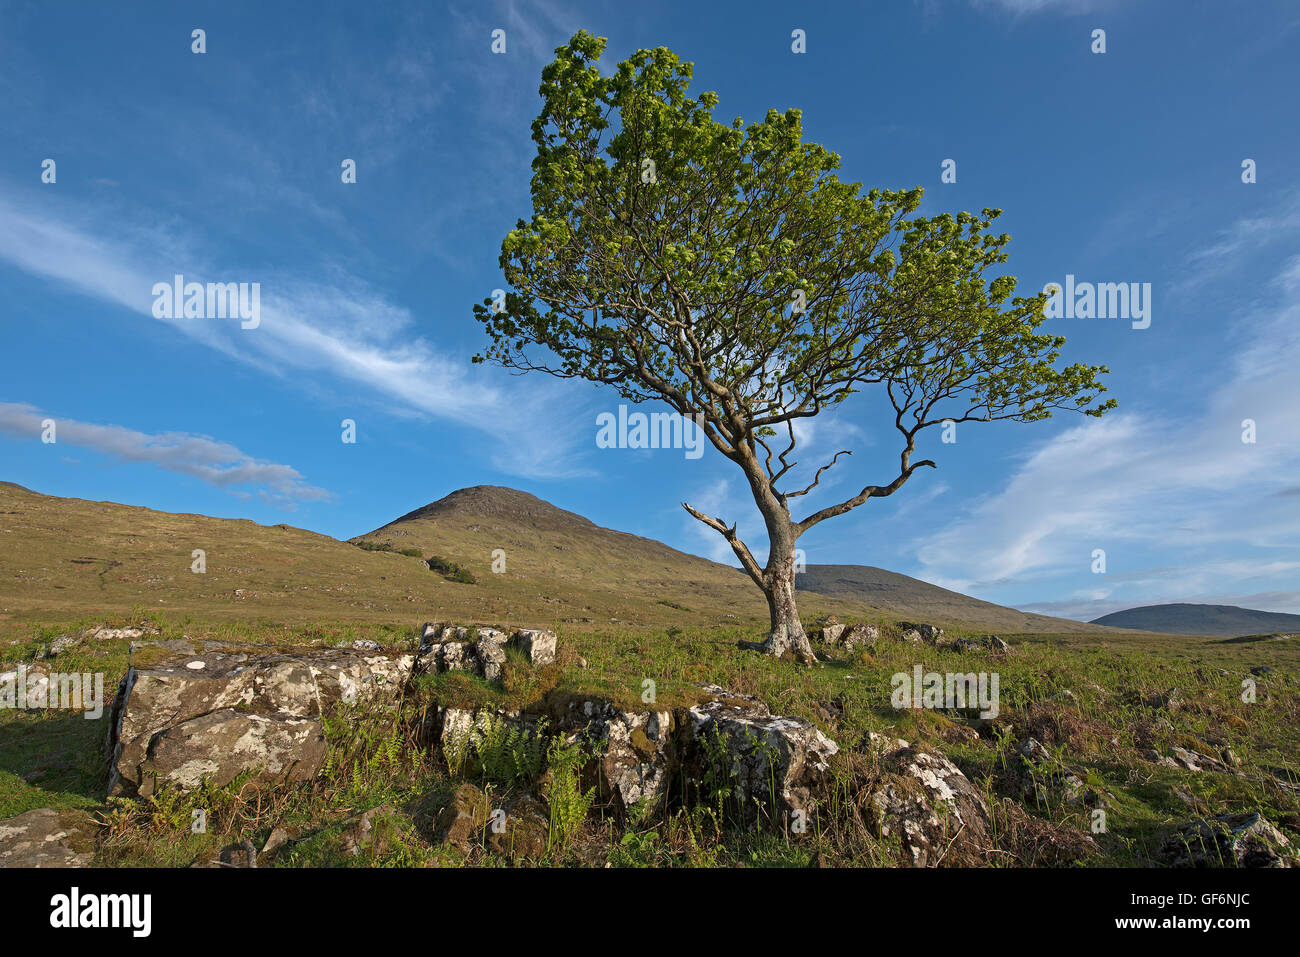 A lonely oak tree surviving on a hillside on the Isle of Mull, Argyll and Bute District, Scotland UK.  SCO,10,959. Stock Photo